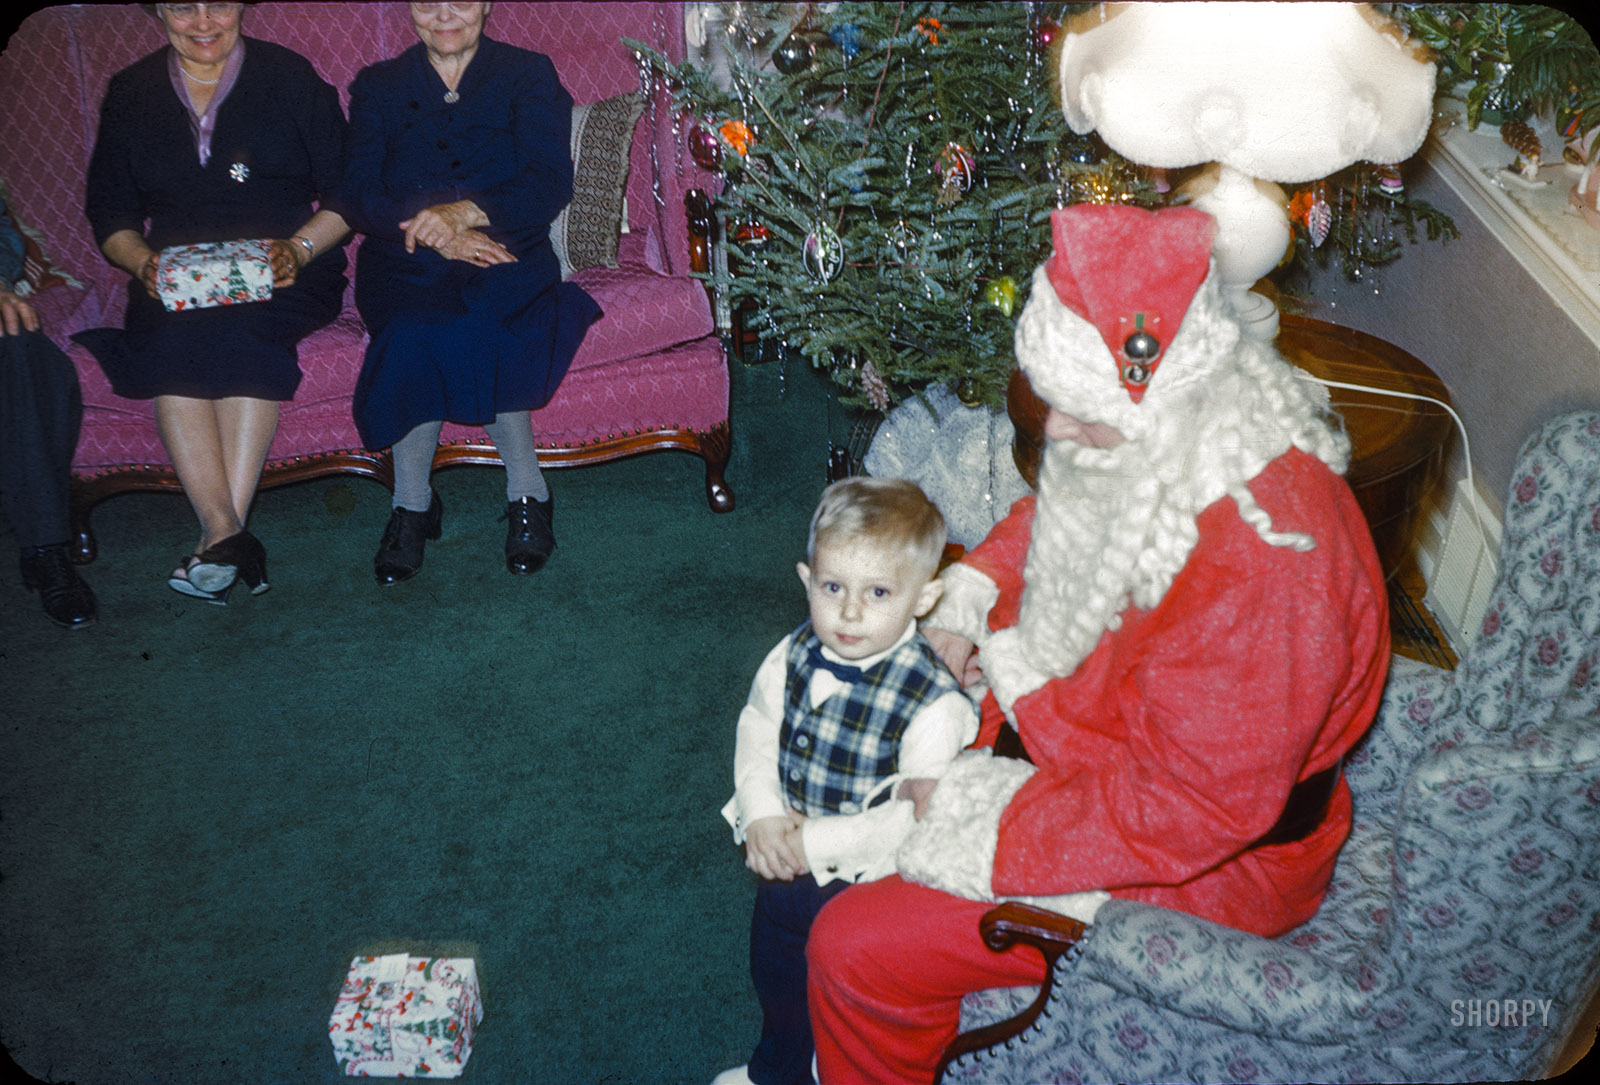 Pennsylvania circa 1958. Santa makes a house call! So, what do you want, Sonny? Come sit on Santa's lap and tell him all about it. View full size.